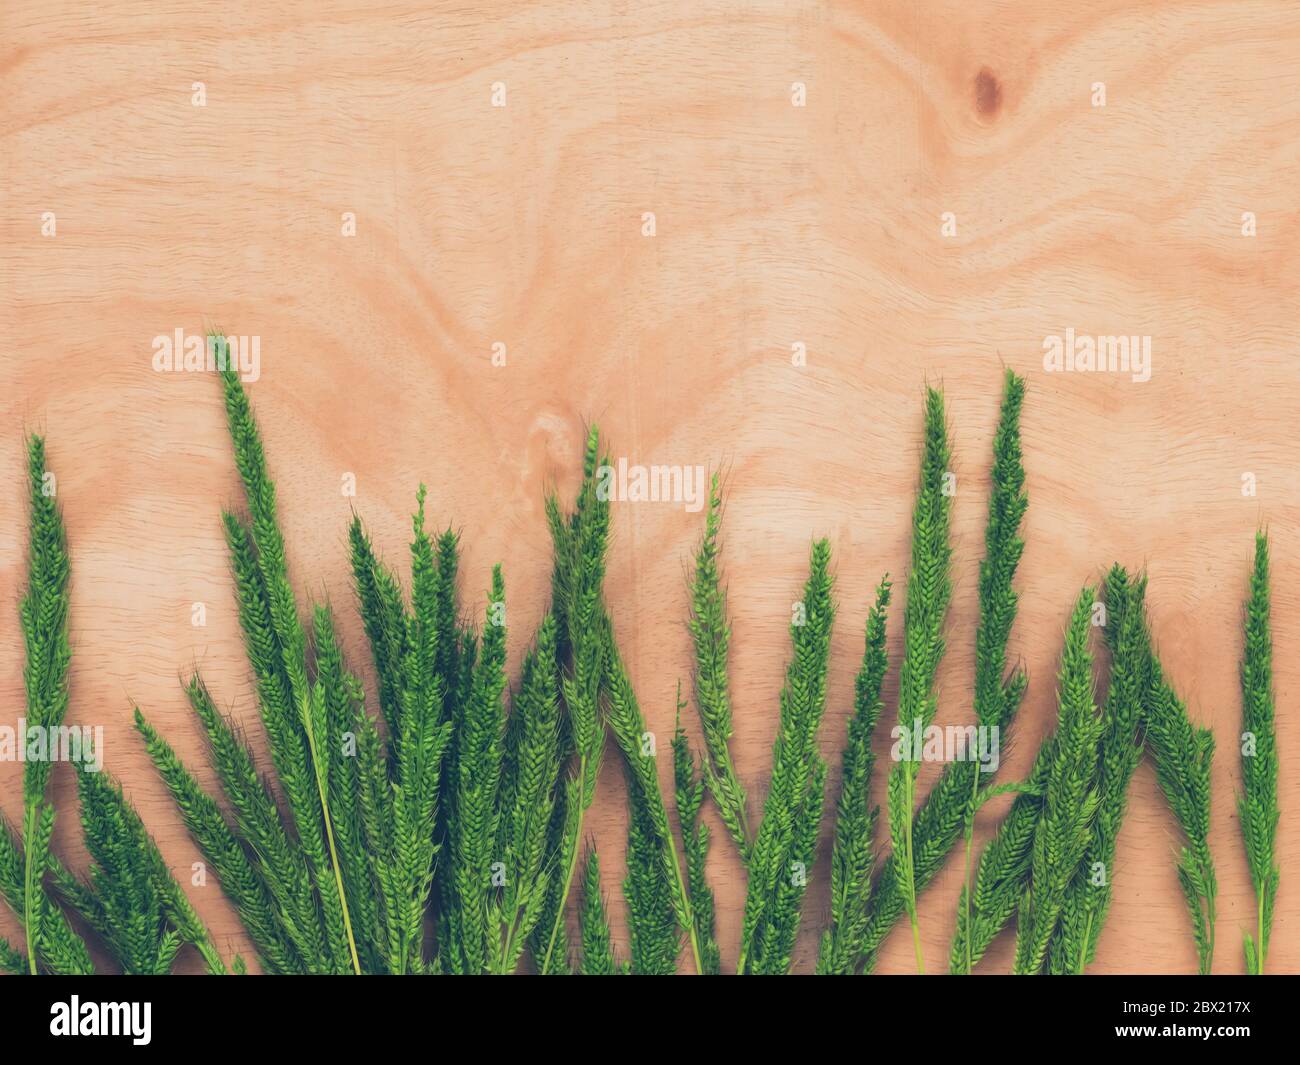 Top view of whet crop on wooden table background. Stock Photo